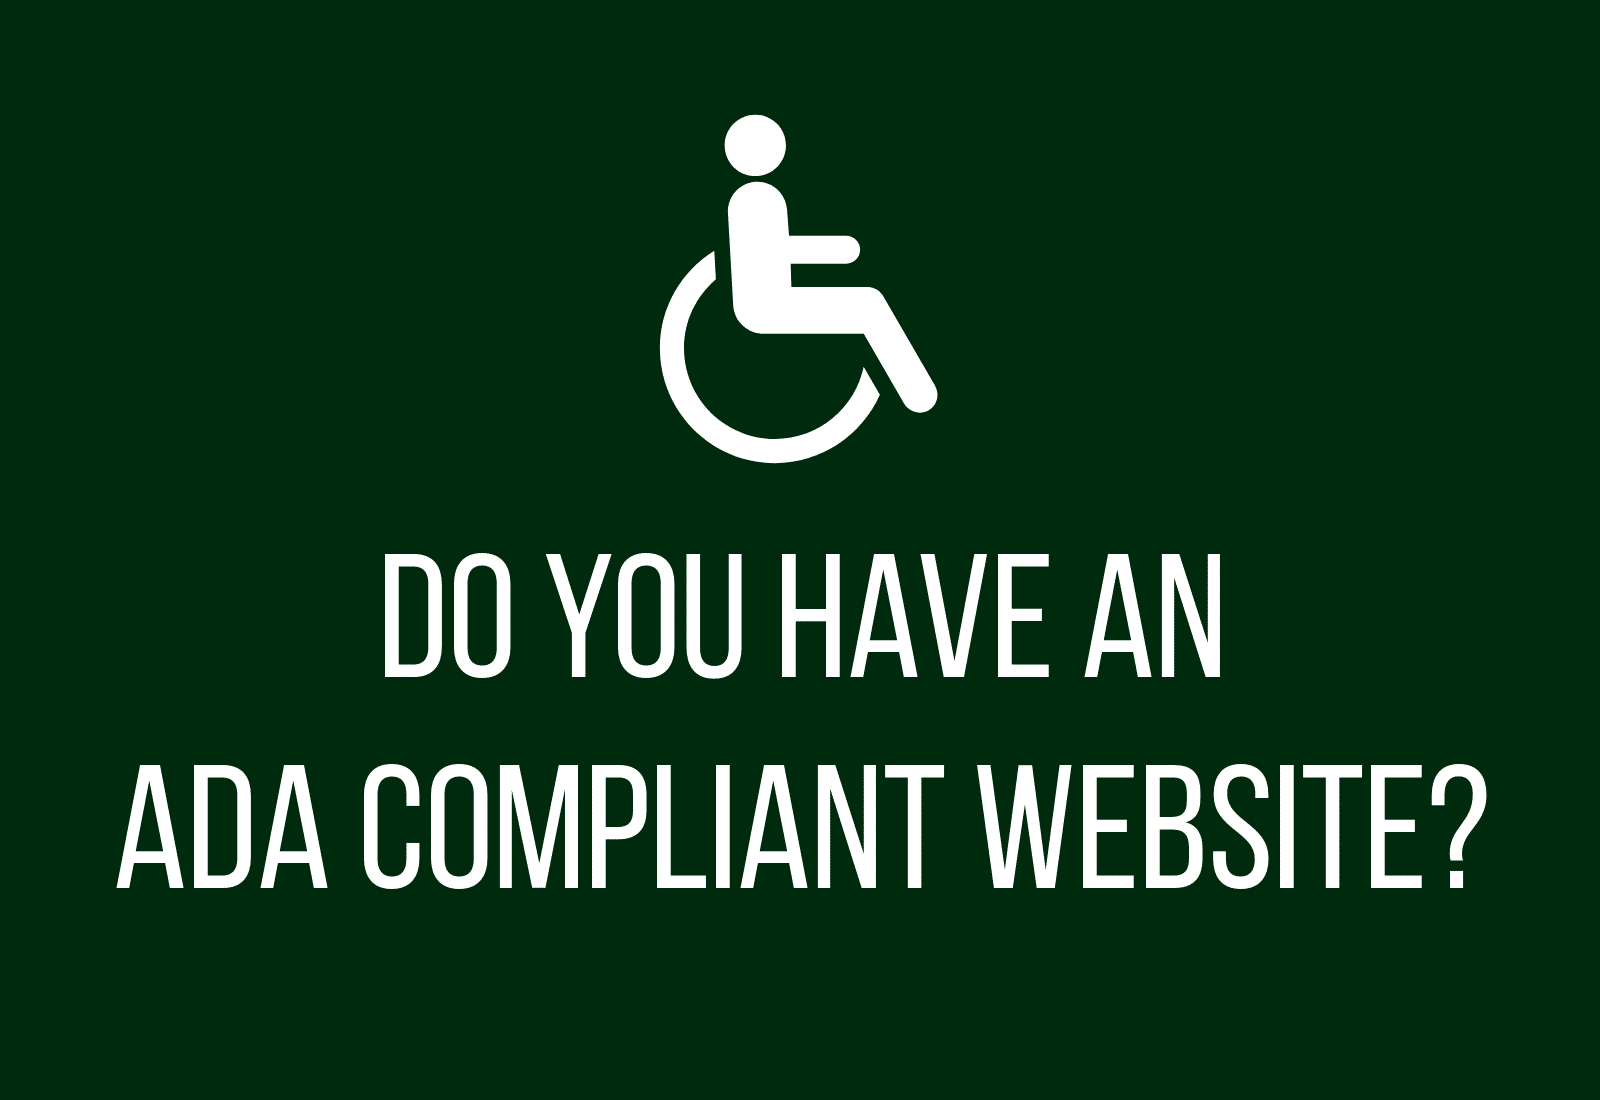 Do You Have an ADA Compliant Website?